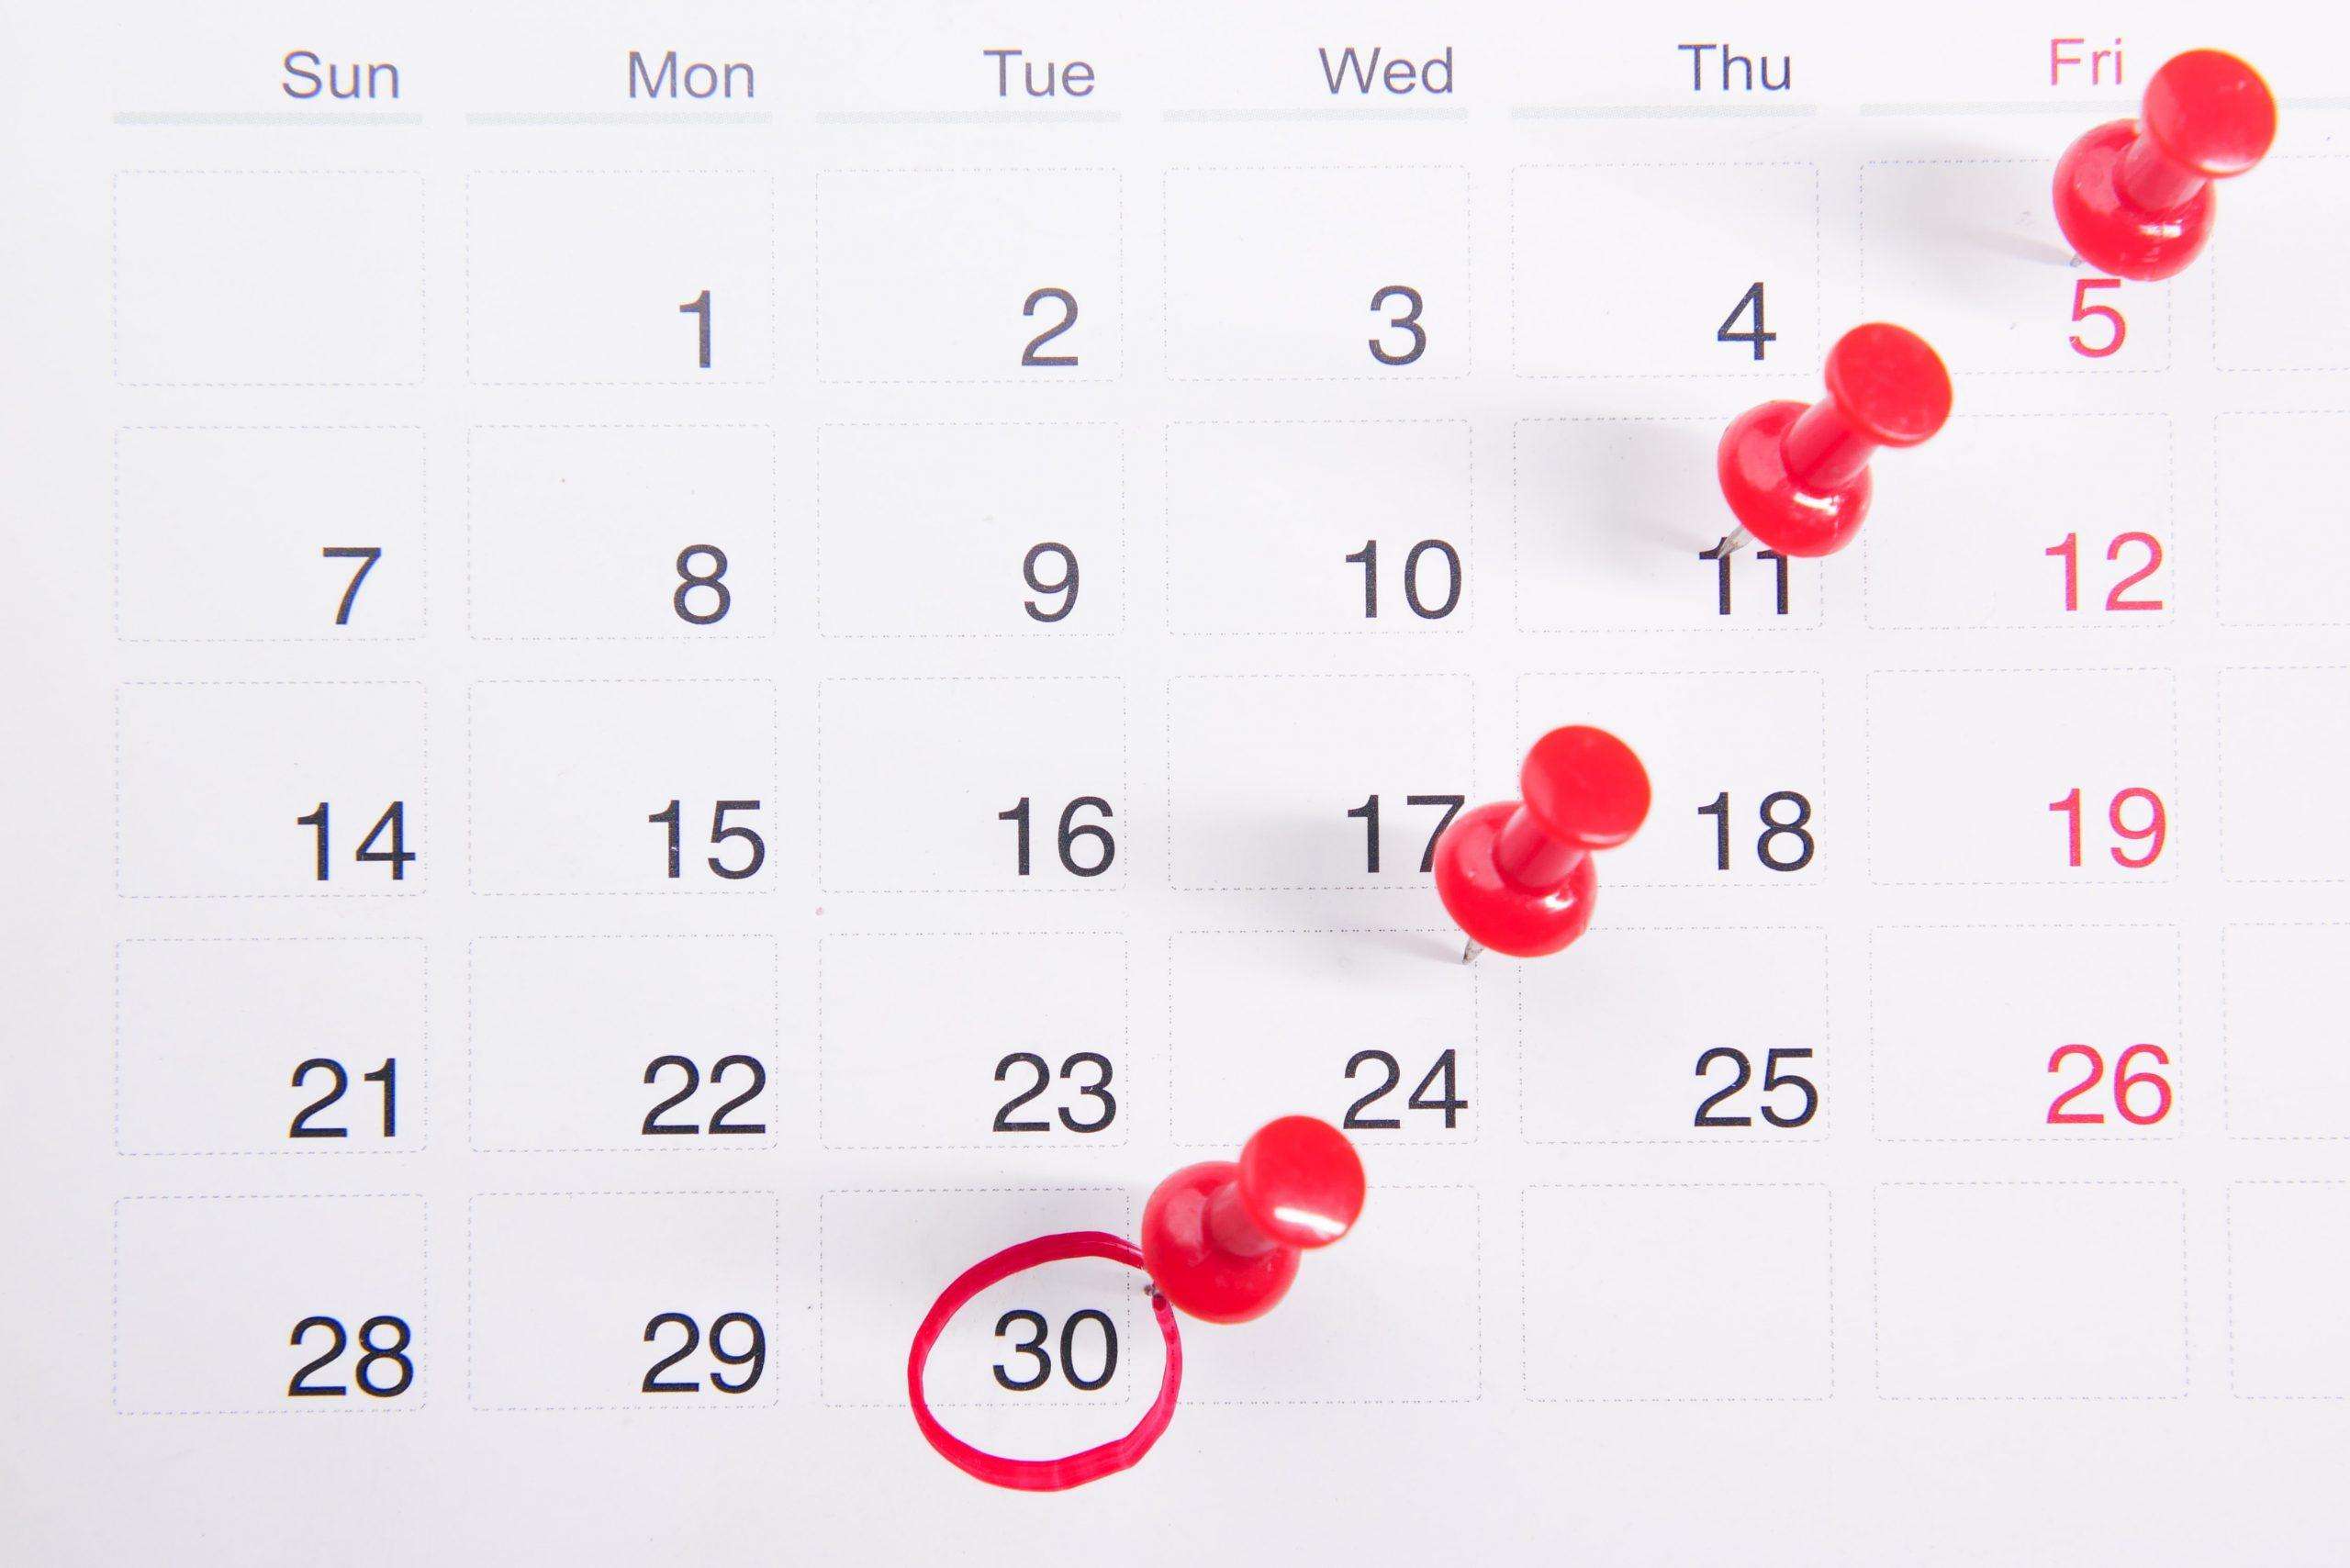 Push pins and a red circle marking specific calendar days 5, 11, 24, and 30